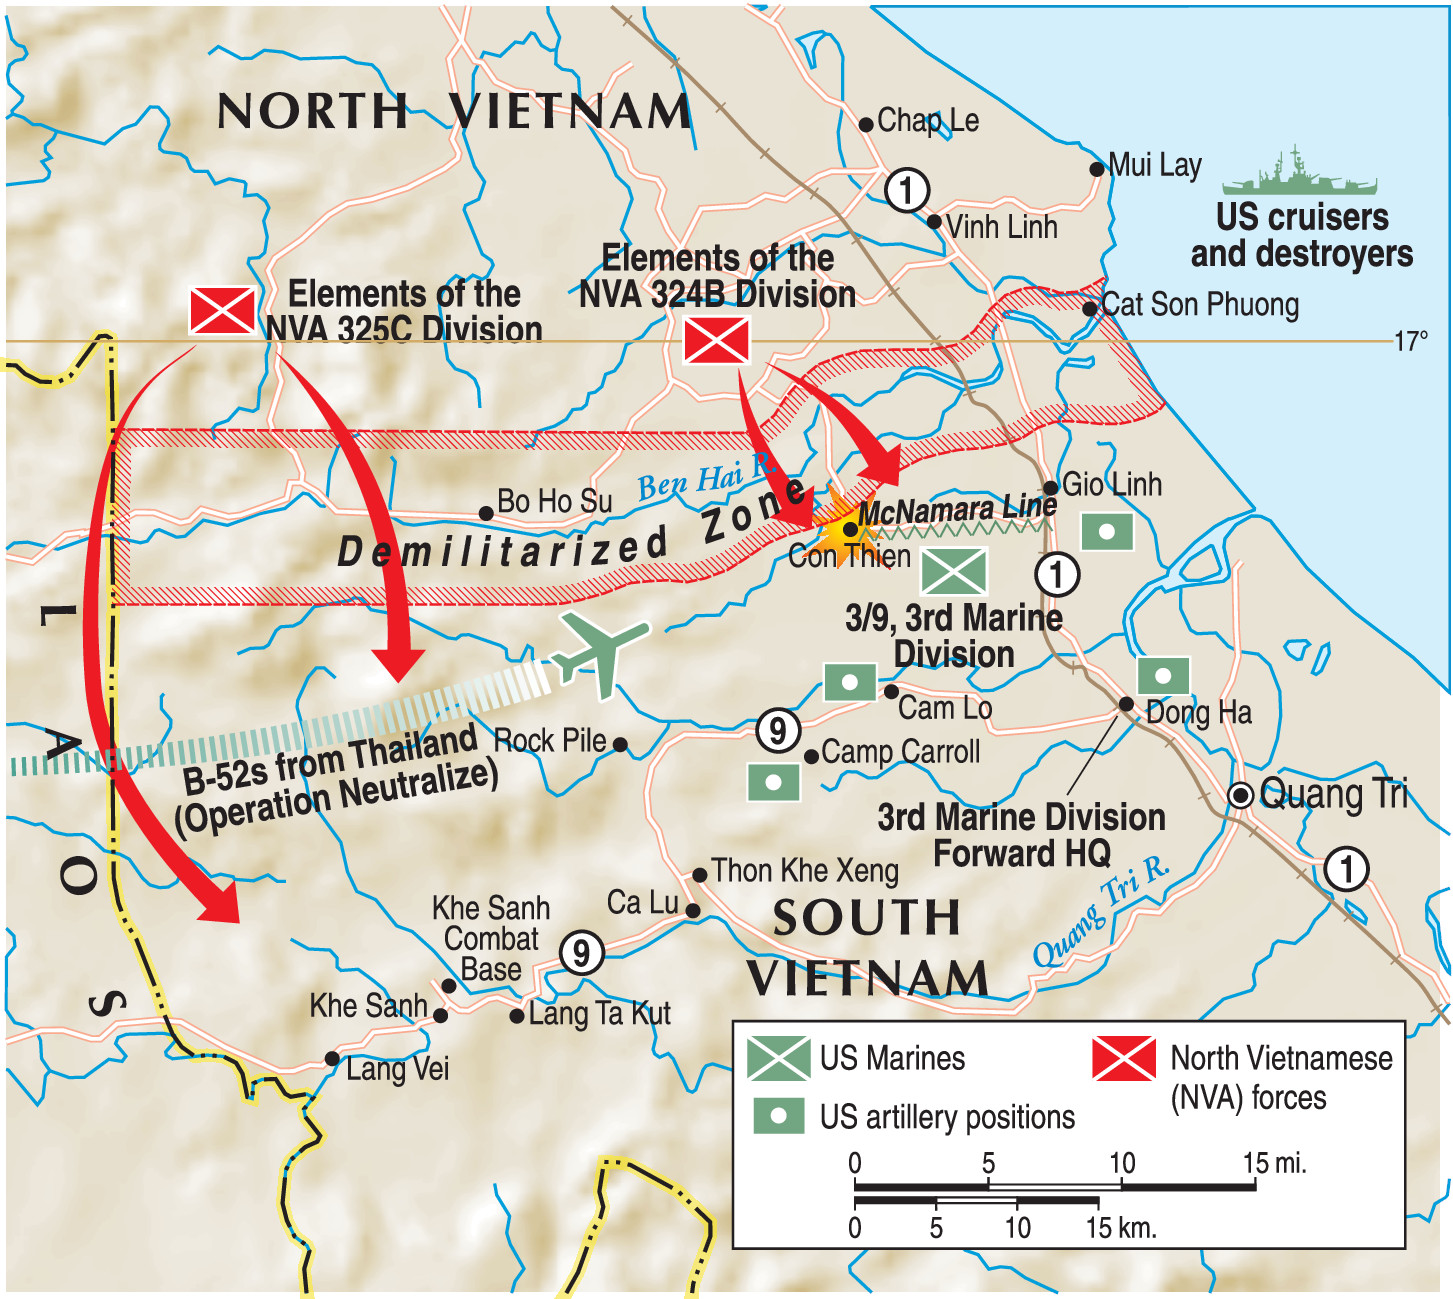 Along with Khe Sanh, Con Thien was a key strongpoint in Secretary of Defense Robert S. McNamara’s grandiose scheme to dam the influx of North Vietnamese fire.